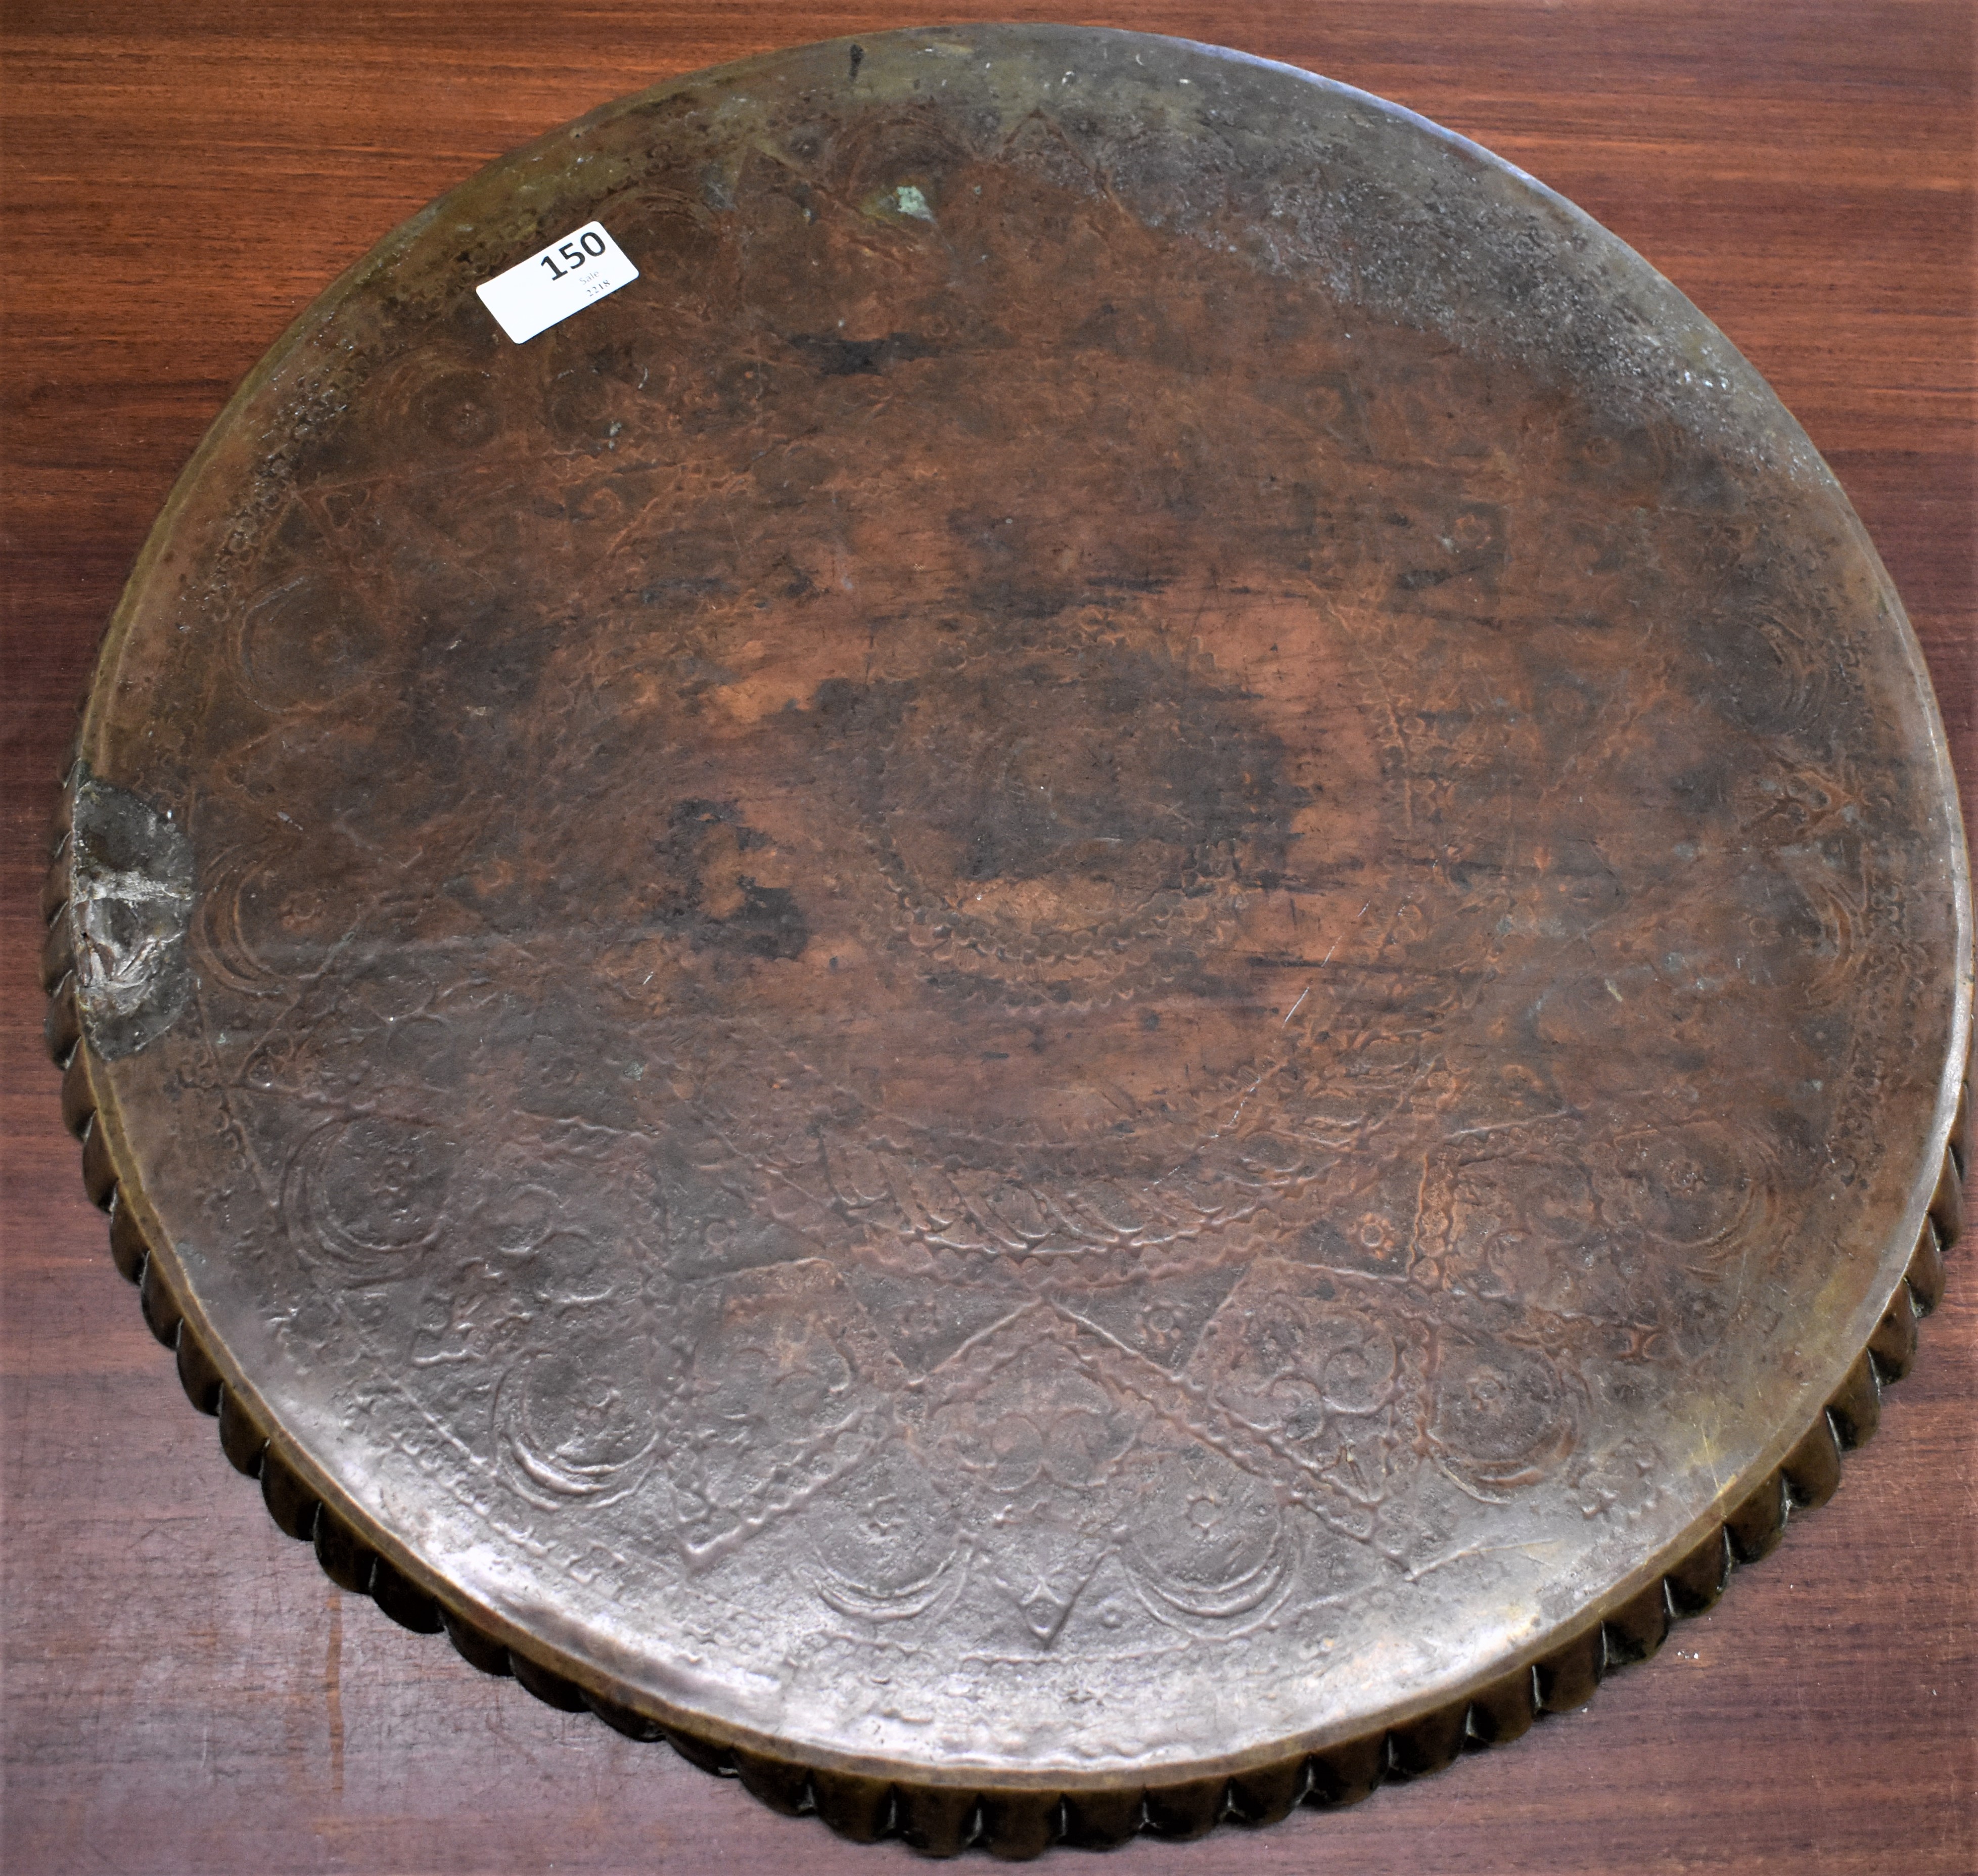 Vintage Middle Eastern Etched Round Copper Tray Table, a very ornate floral and Crescent etched - Image 2 of 2